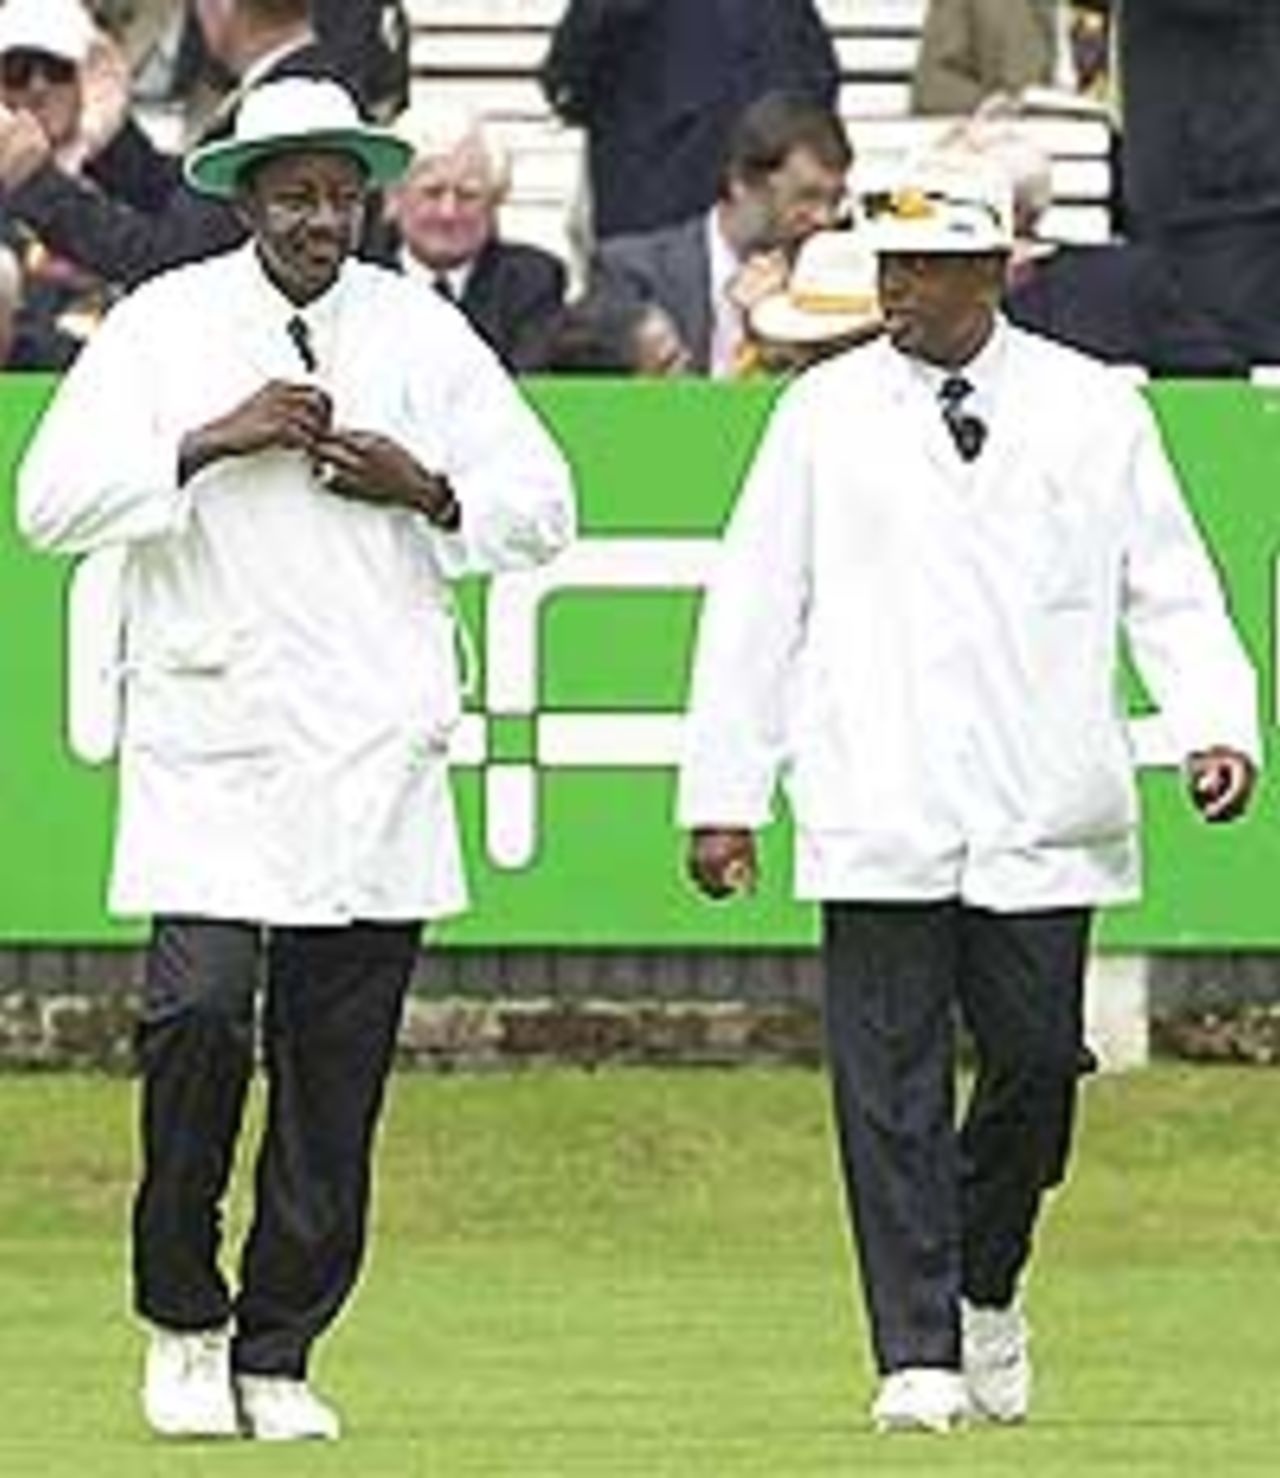 England v Australia, 2nd npower Ashes Test at Lord's, 19-22 July 2001